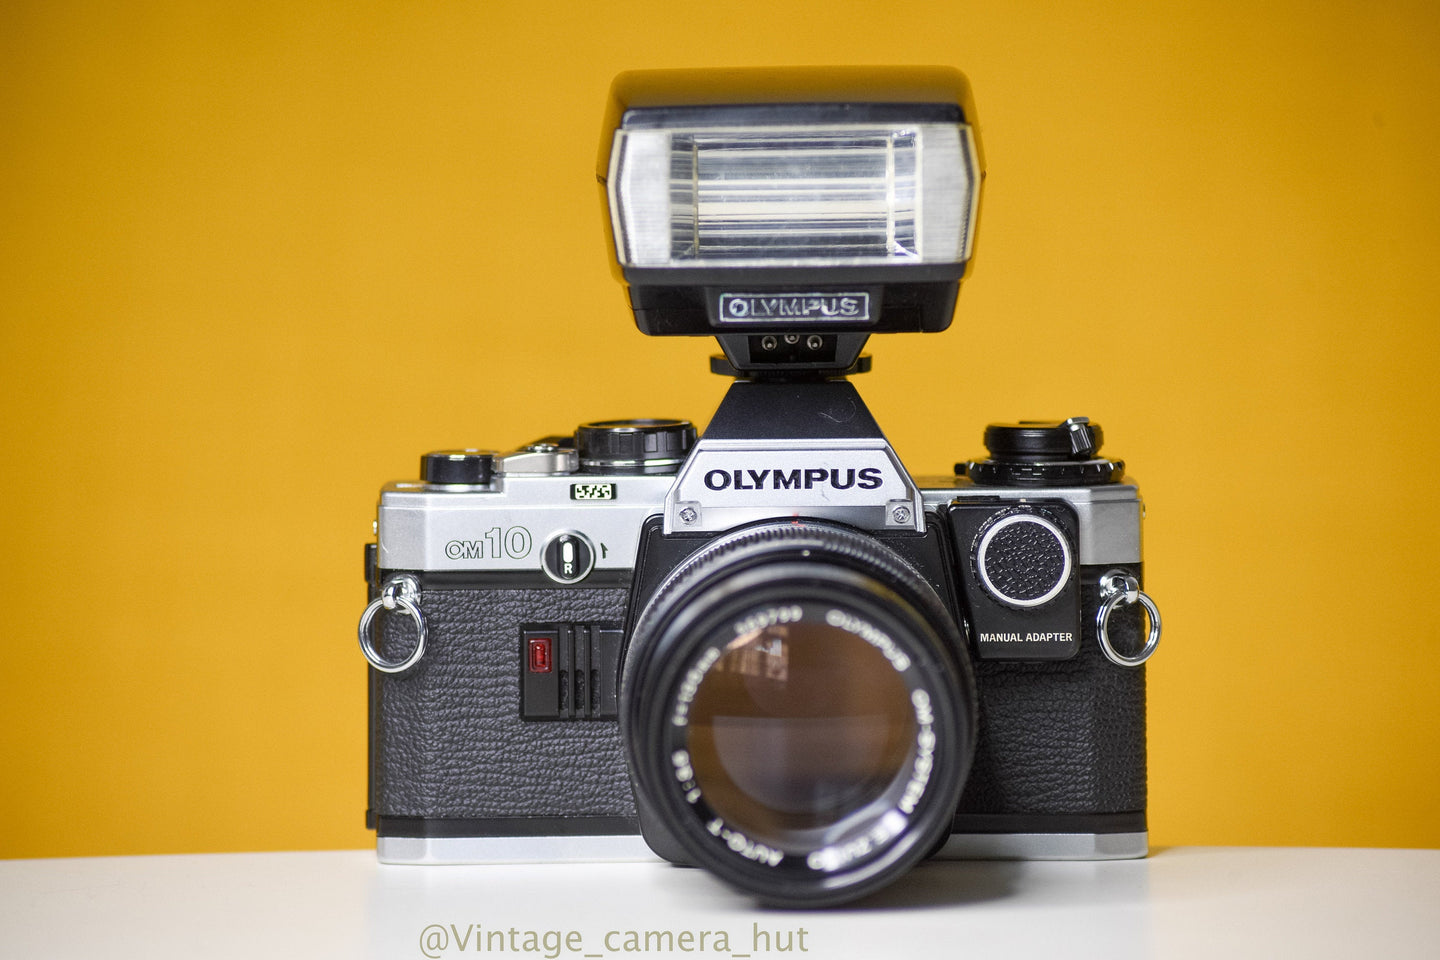 Olympus OM10 SLR Vintage 35mm Film Camera with Zuiko Auto-T 135mm f3.5 Prime Lens with Manual Adapter And Olympus Flash